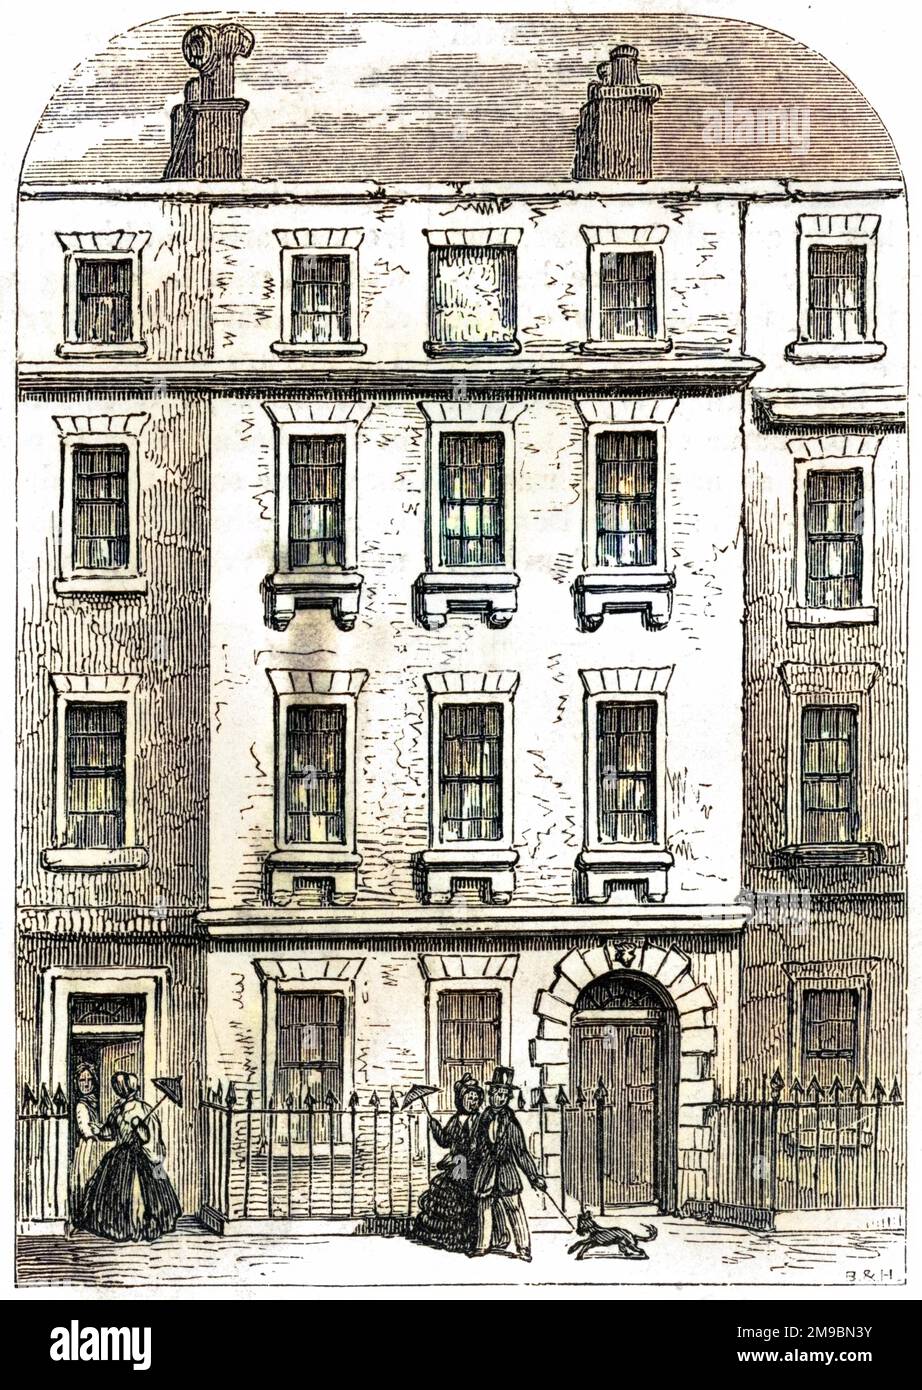 The birthplace of the sculptor Joseph Nollekens at 28 Dean Street, Soho, London, where no doubt a blue plaque draws it to the attention of the passers-by. Stock Photo